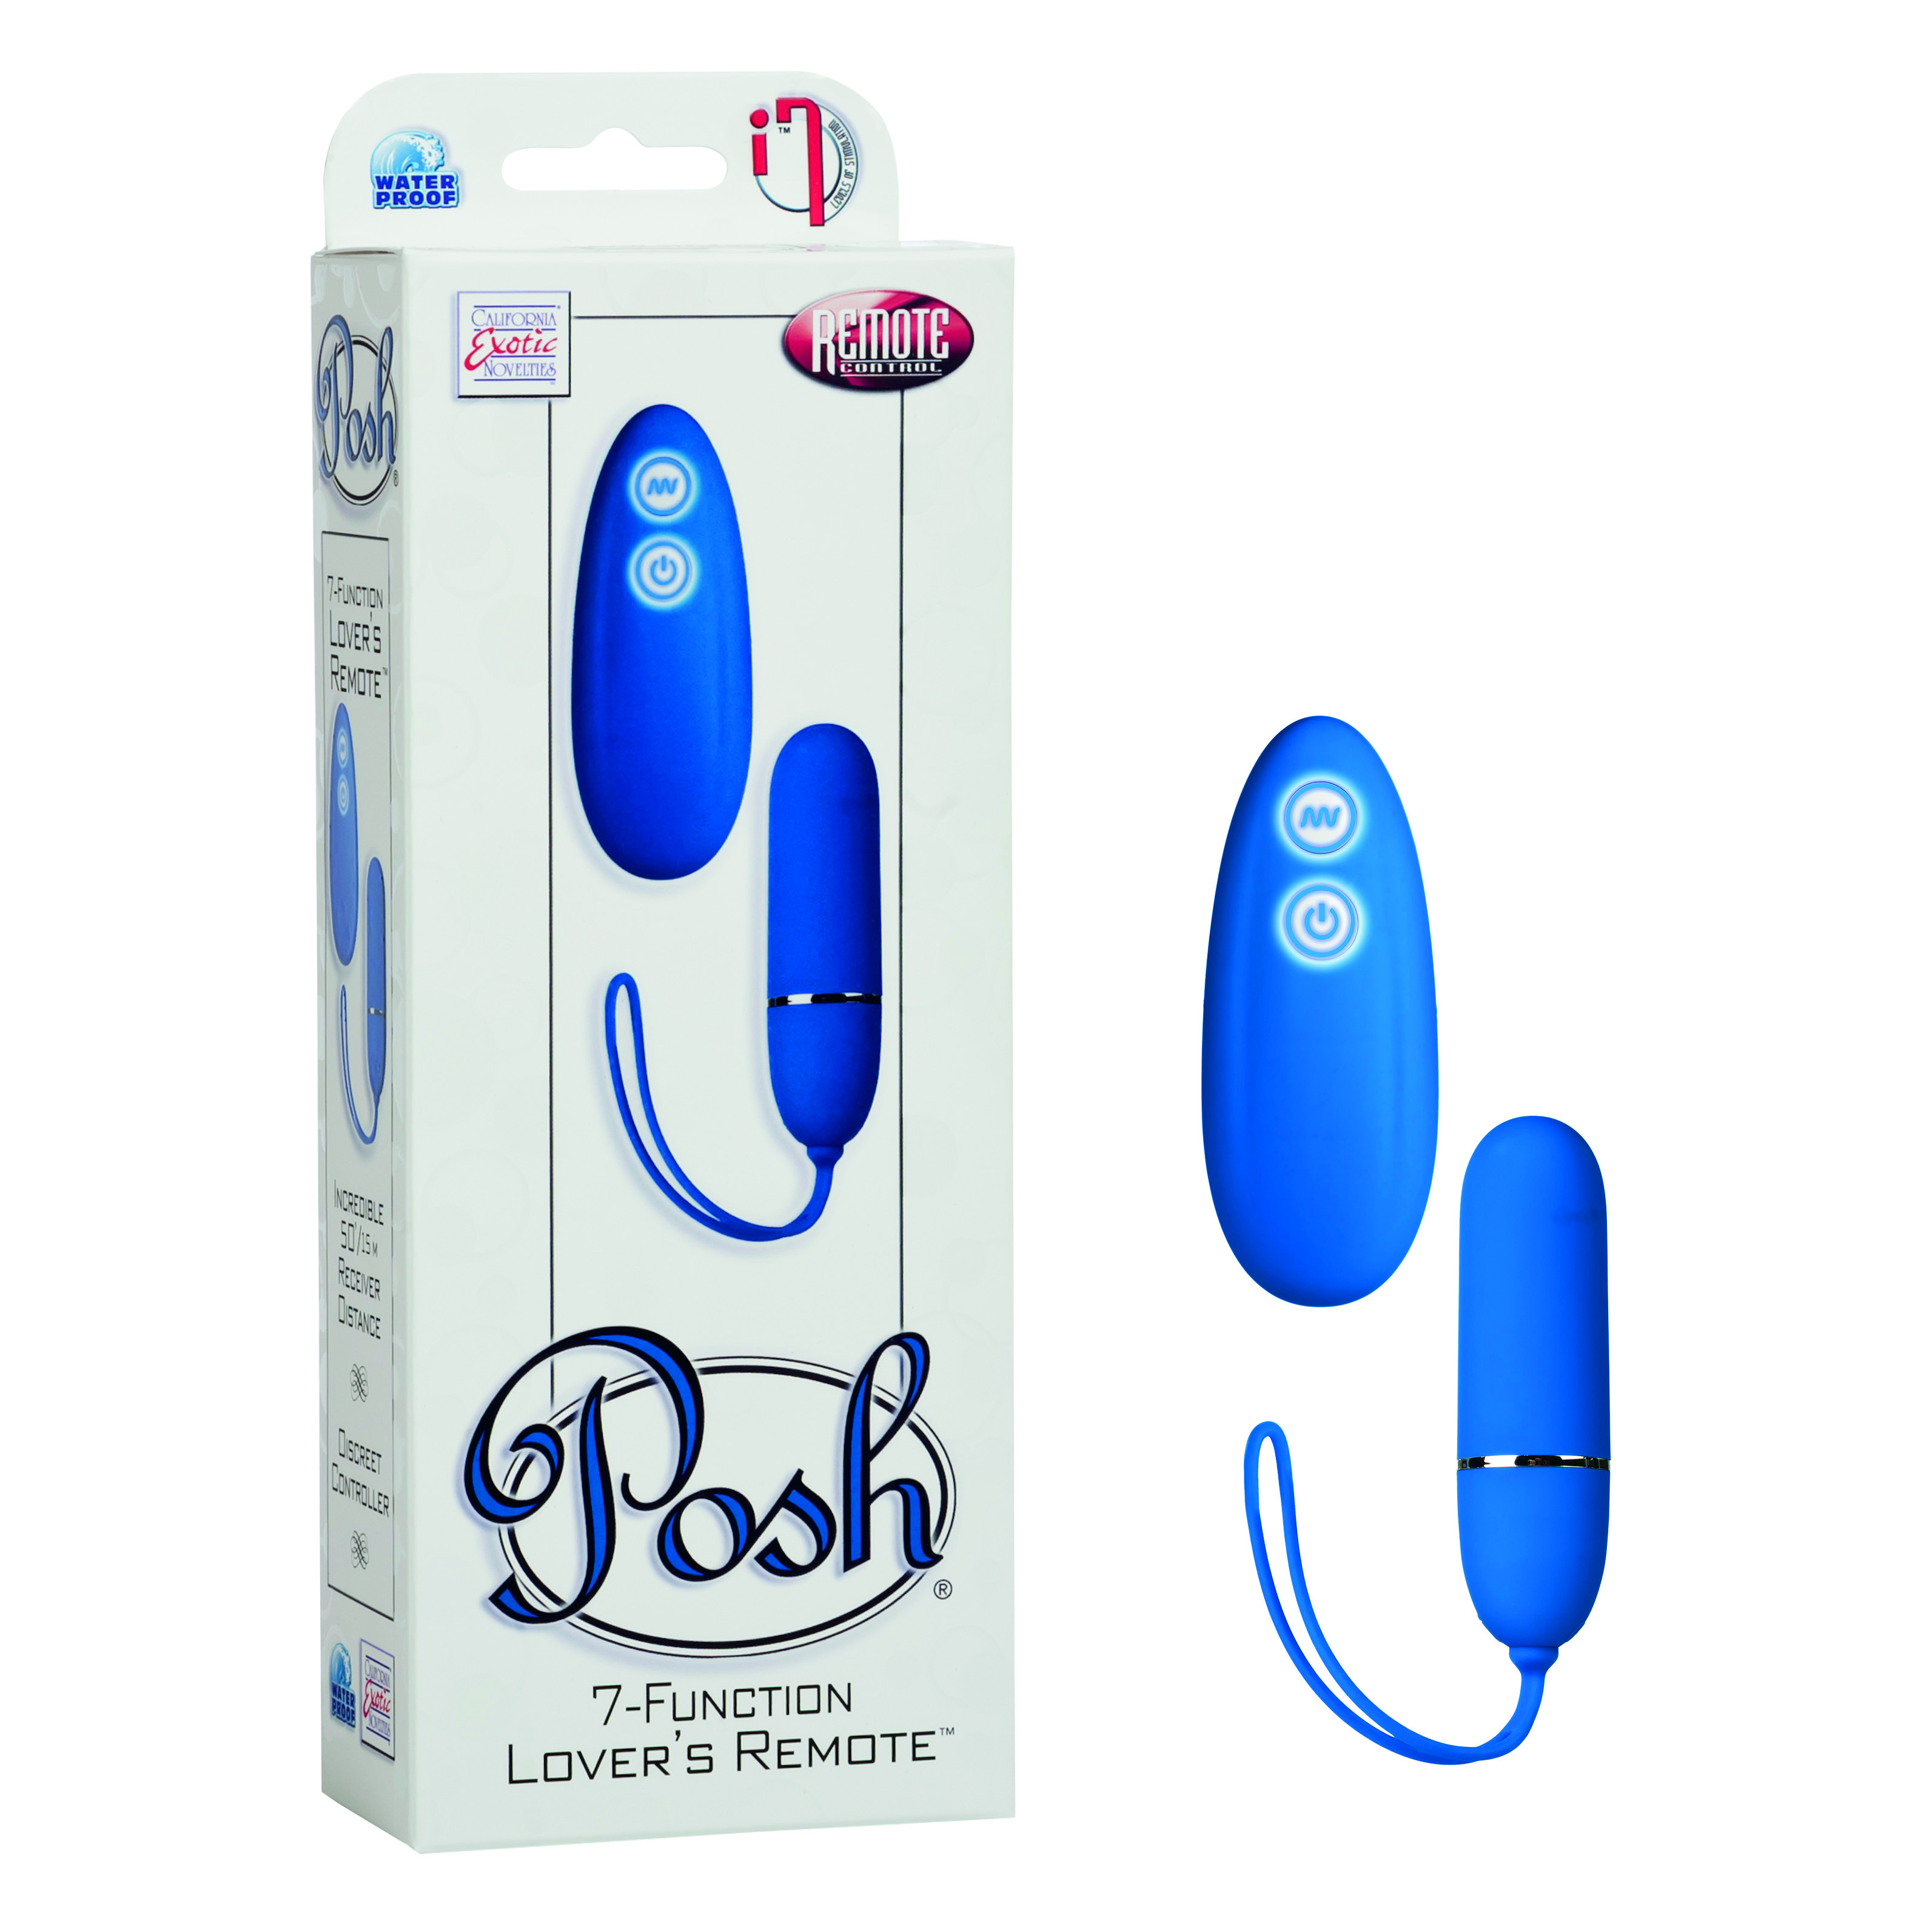 POSH 7 FUNCTION LOVERS REMOTE BLUE 